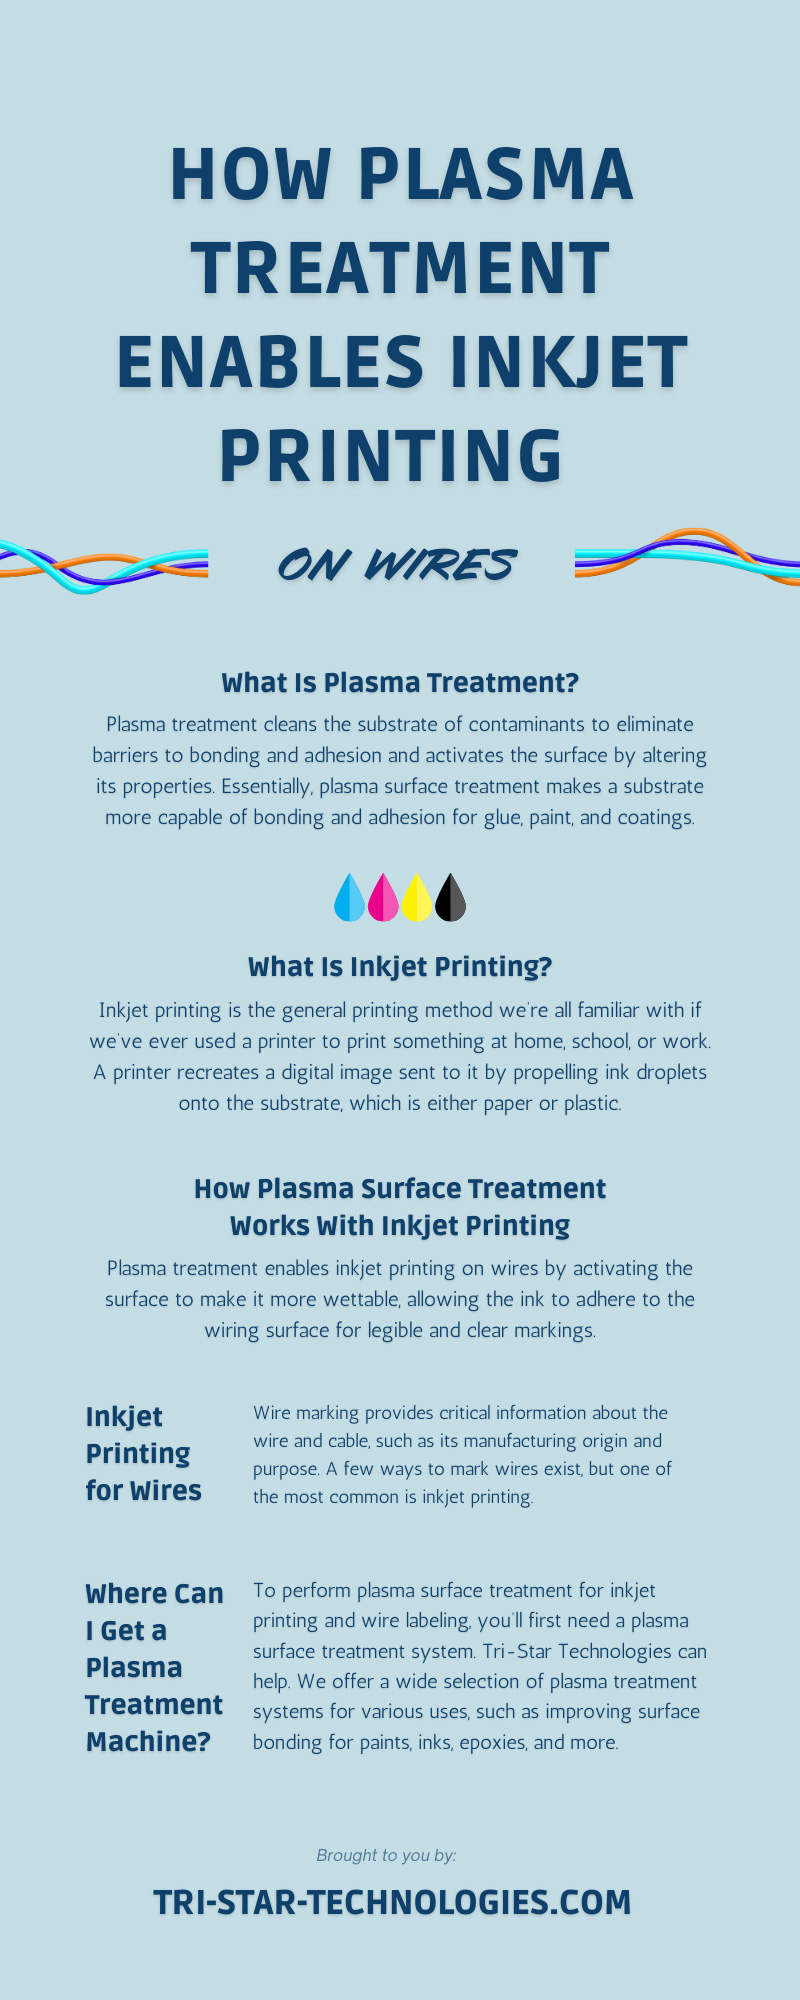 How Plasma Treatment Enables Inkjet Printing on Wires